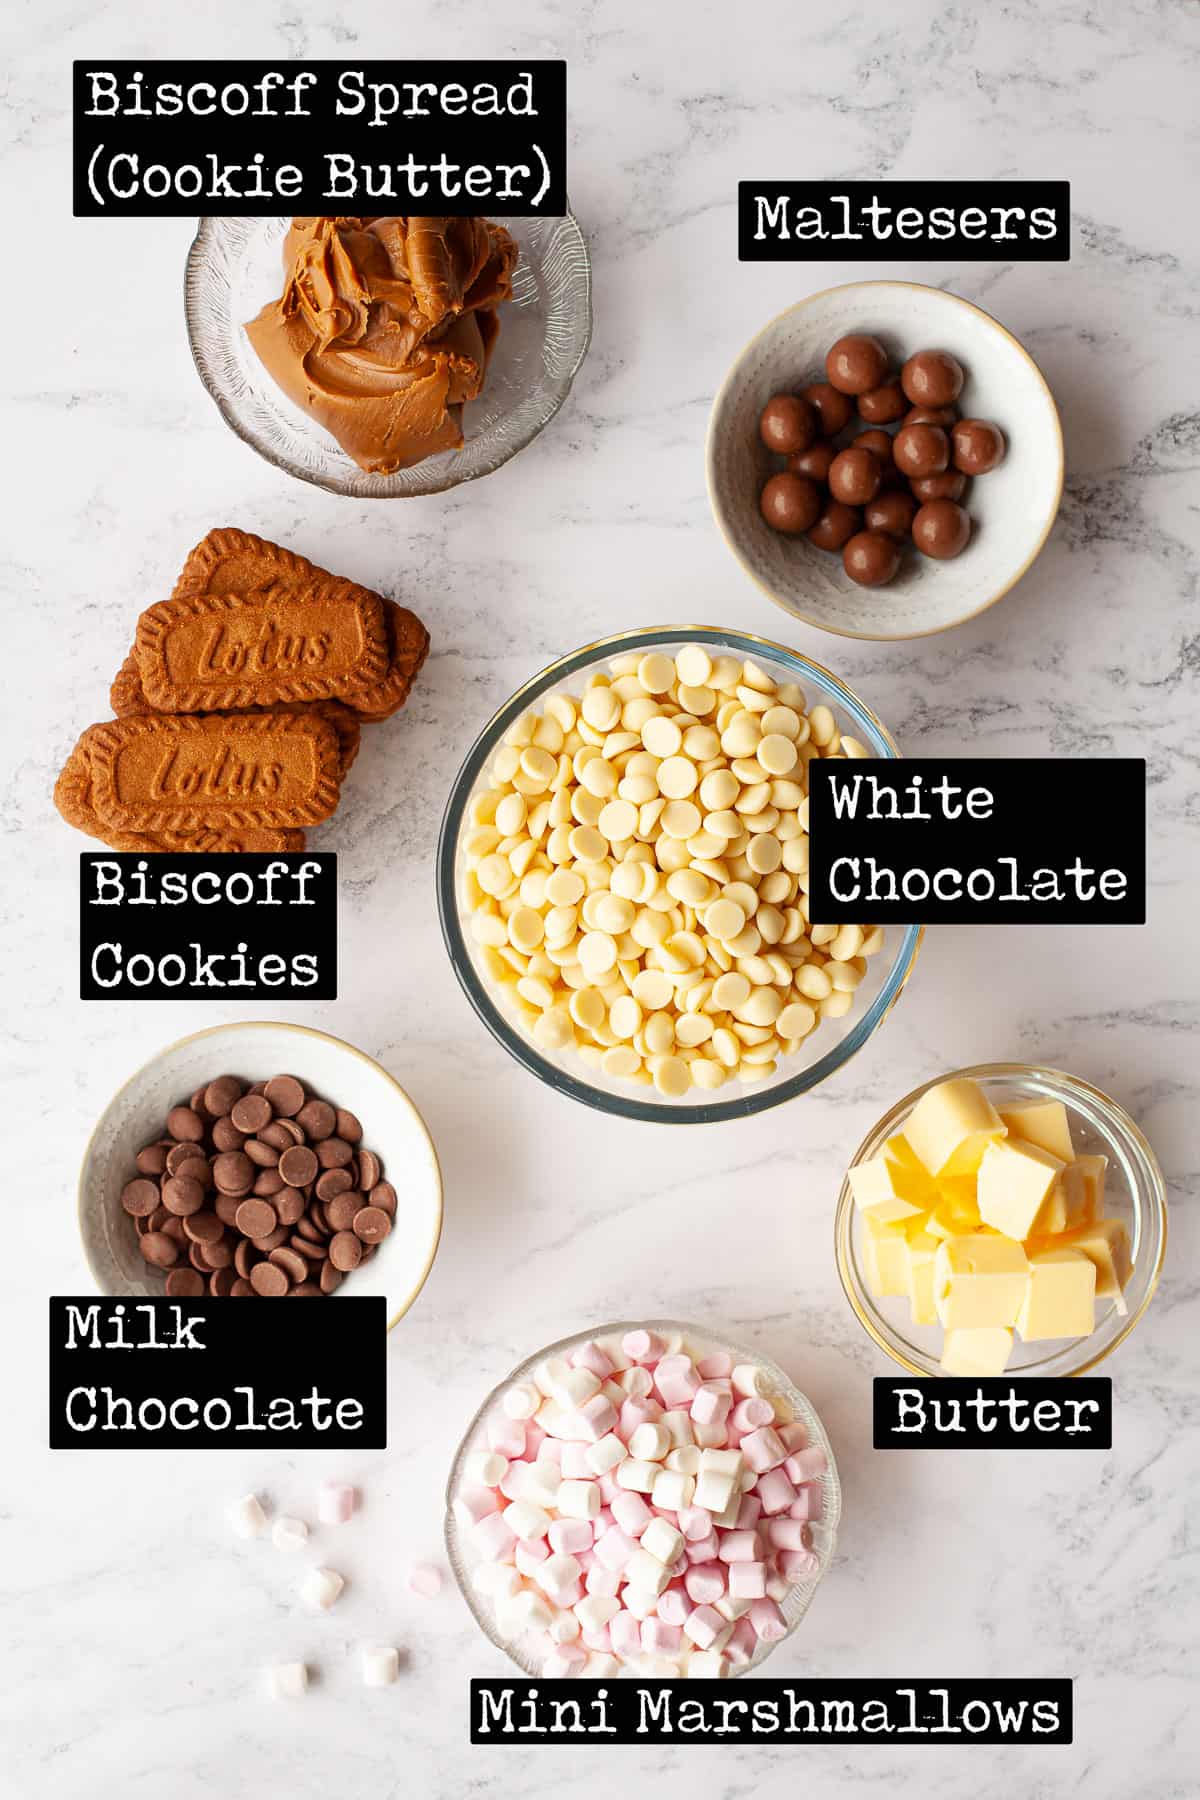 Ingredients with text overlay for a white chocolate and biscoff recipe